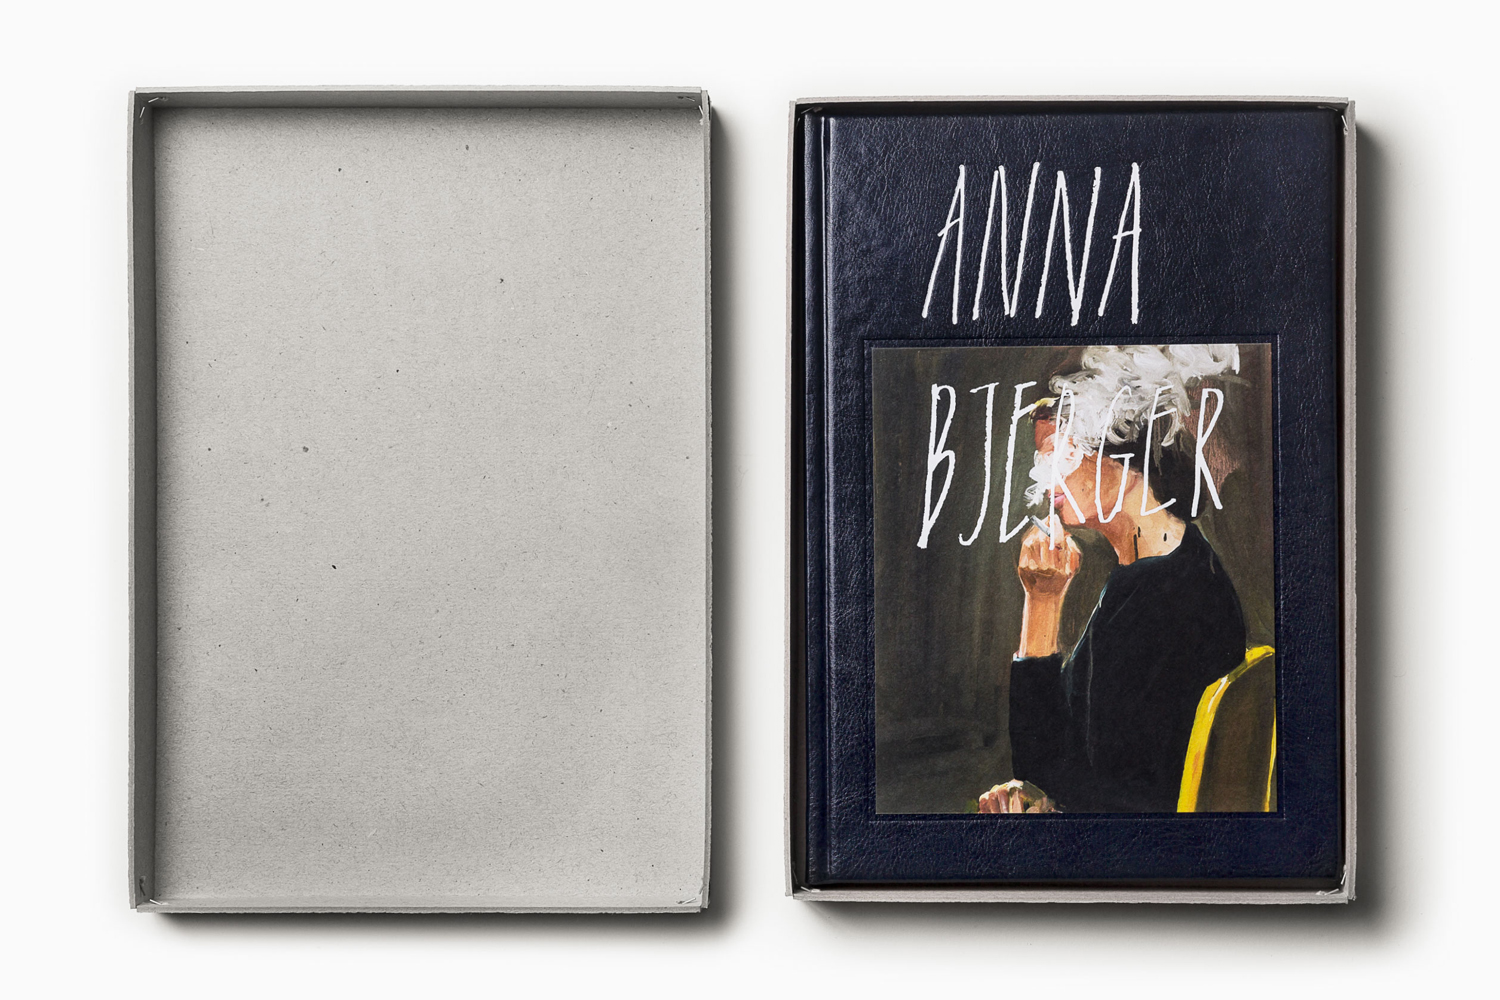 Framing in Branding – Anna Bjerger by Bedow